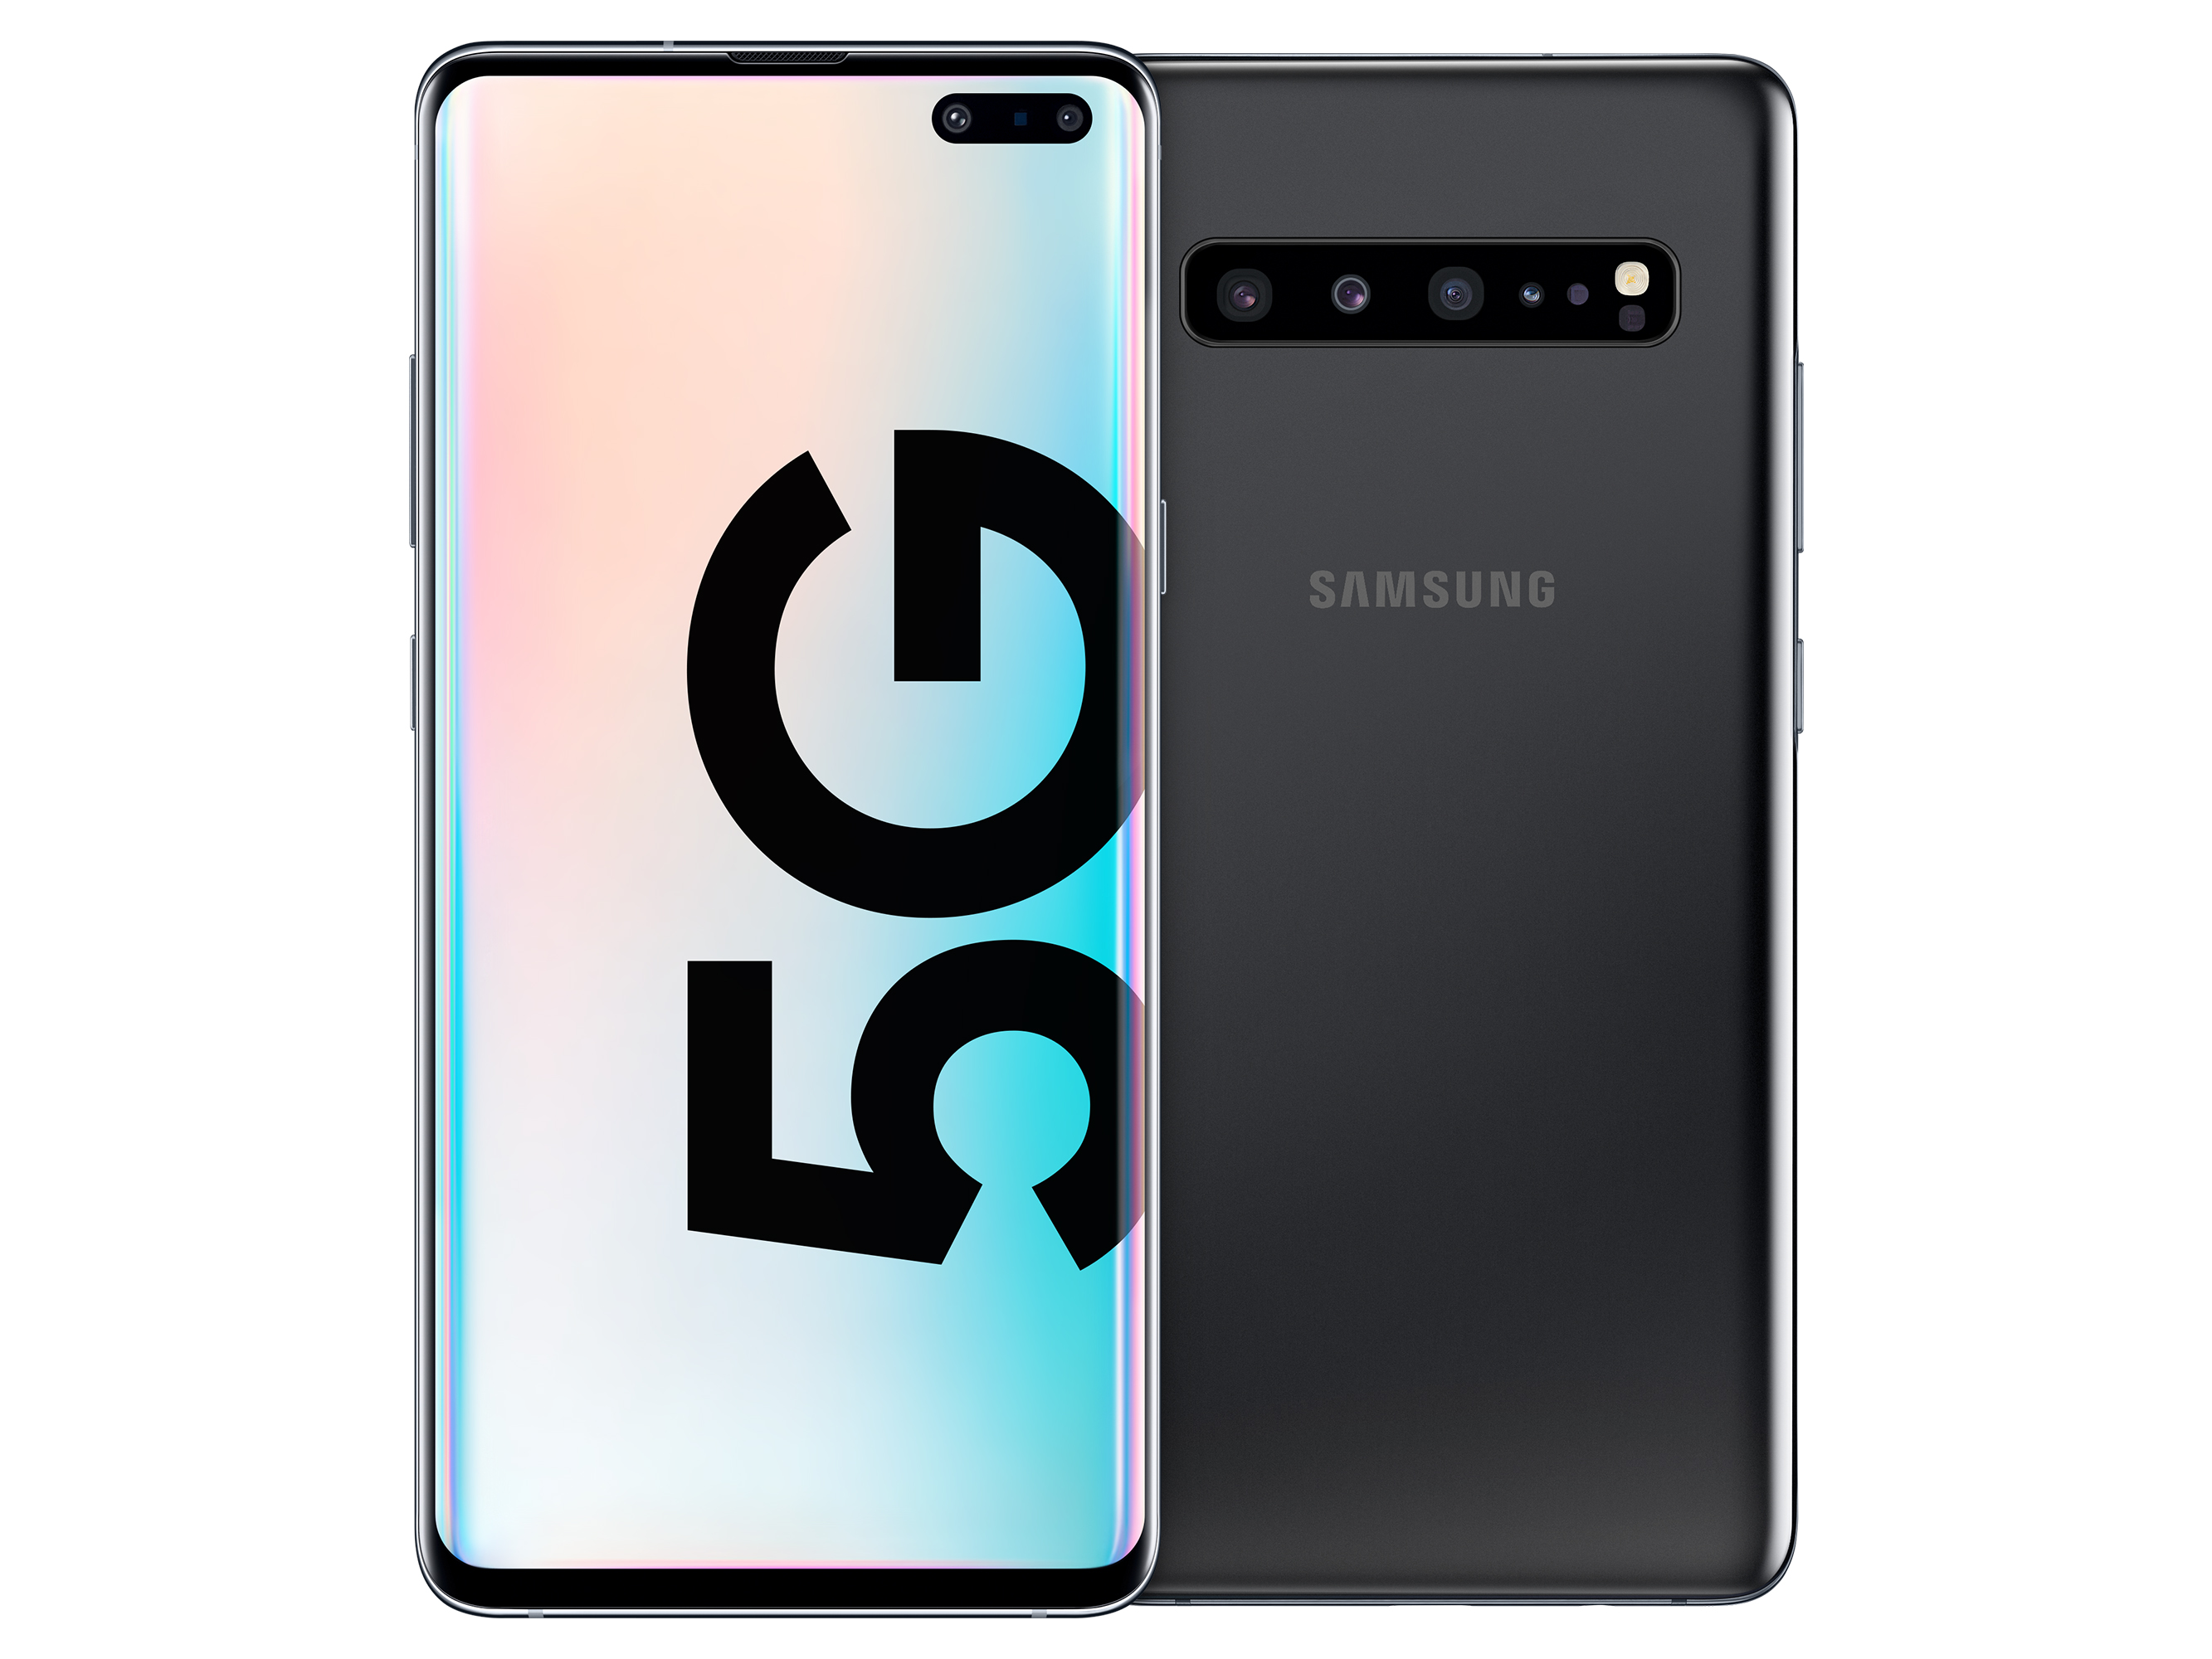 Samsung Galaxy S10 5G Smartphone Review: A turbocharged S10 with a